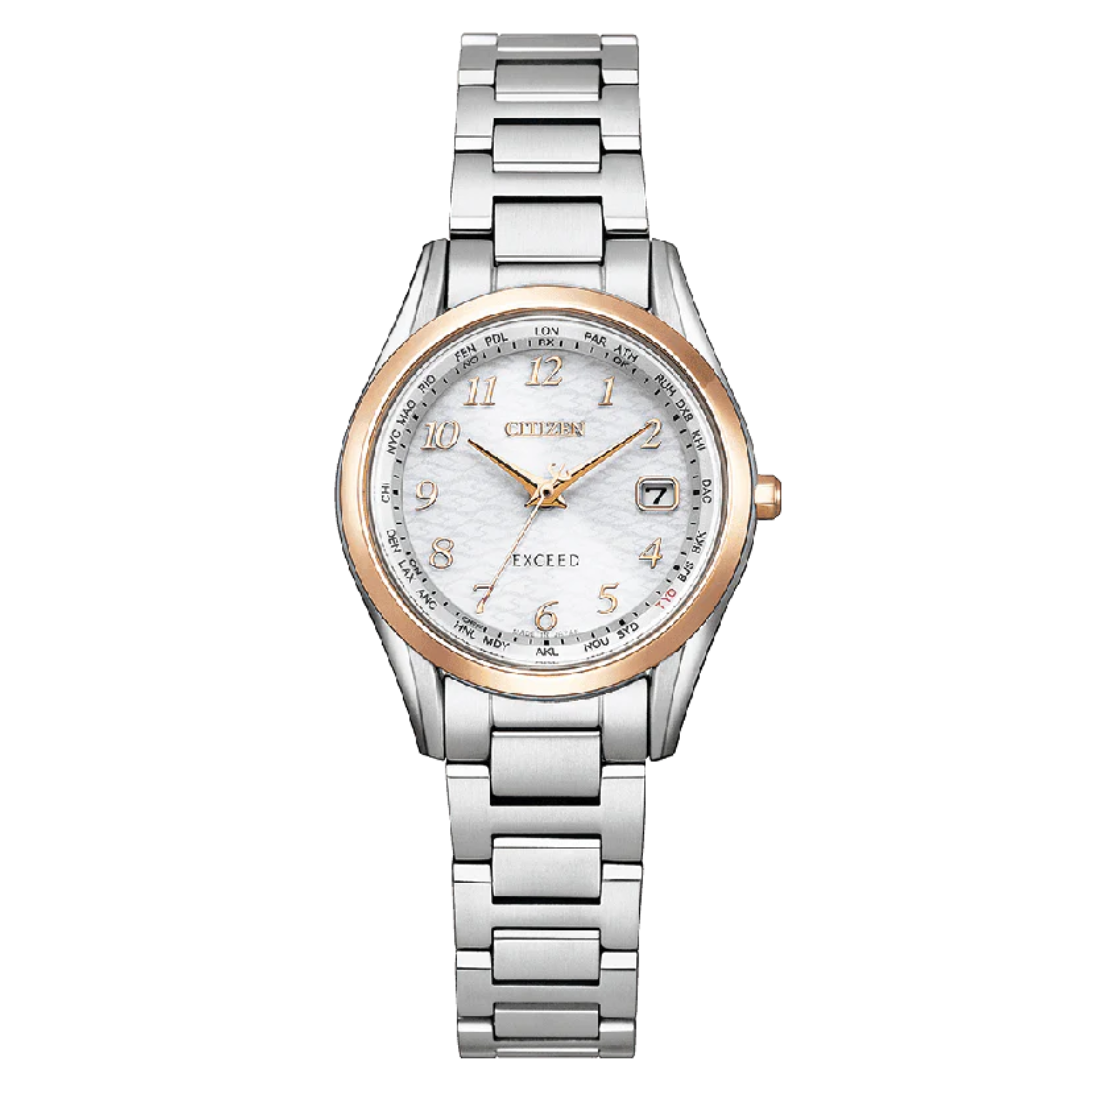 Citizen ES9375-51A Exceed Eco-Drive Limited Edition Ladies Watch (PRE-ORDER)